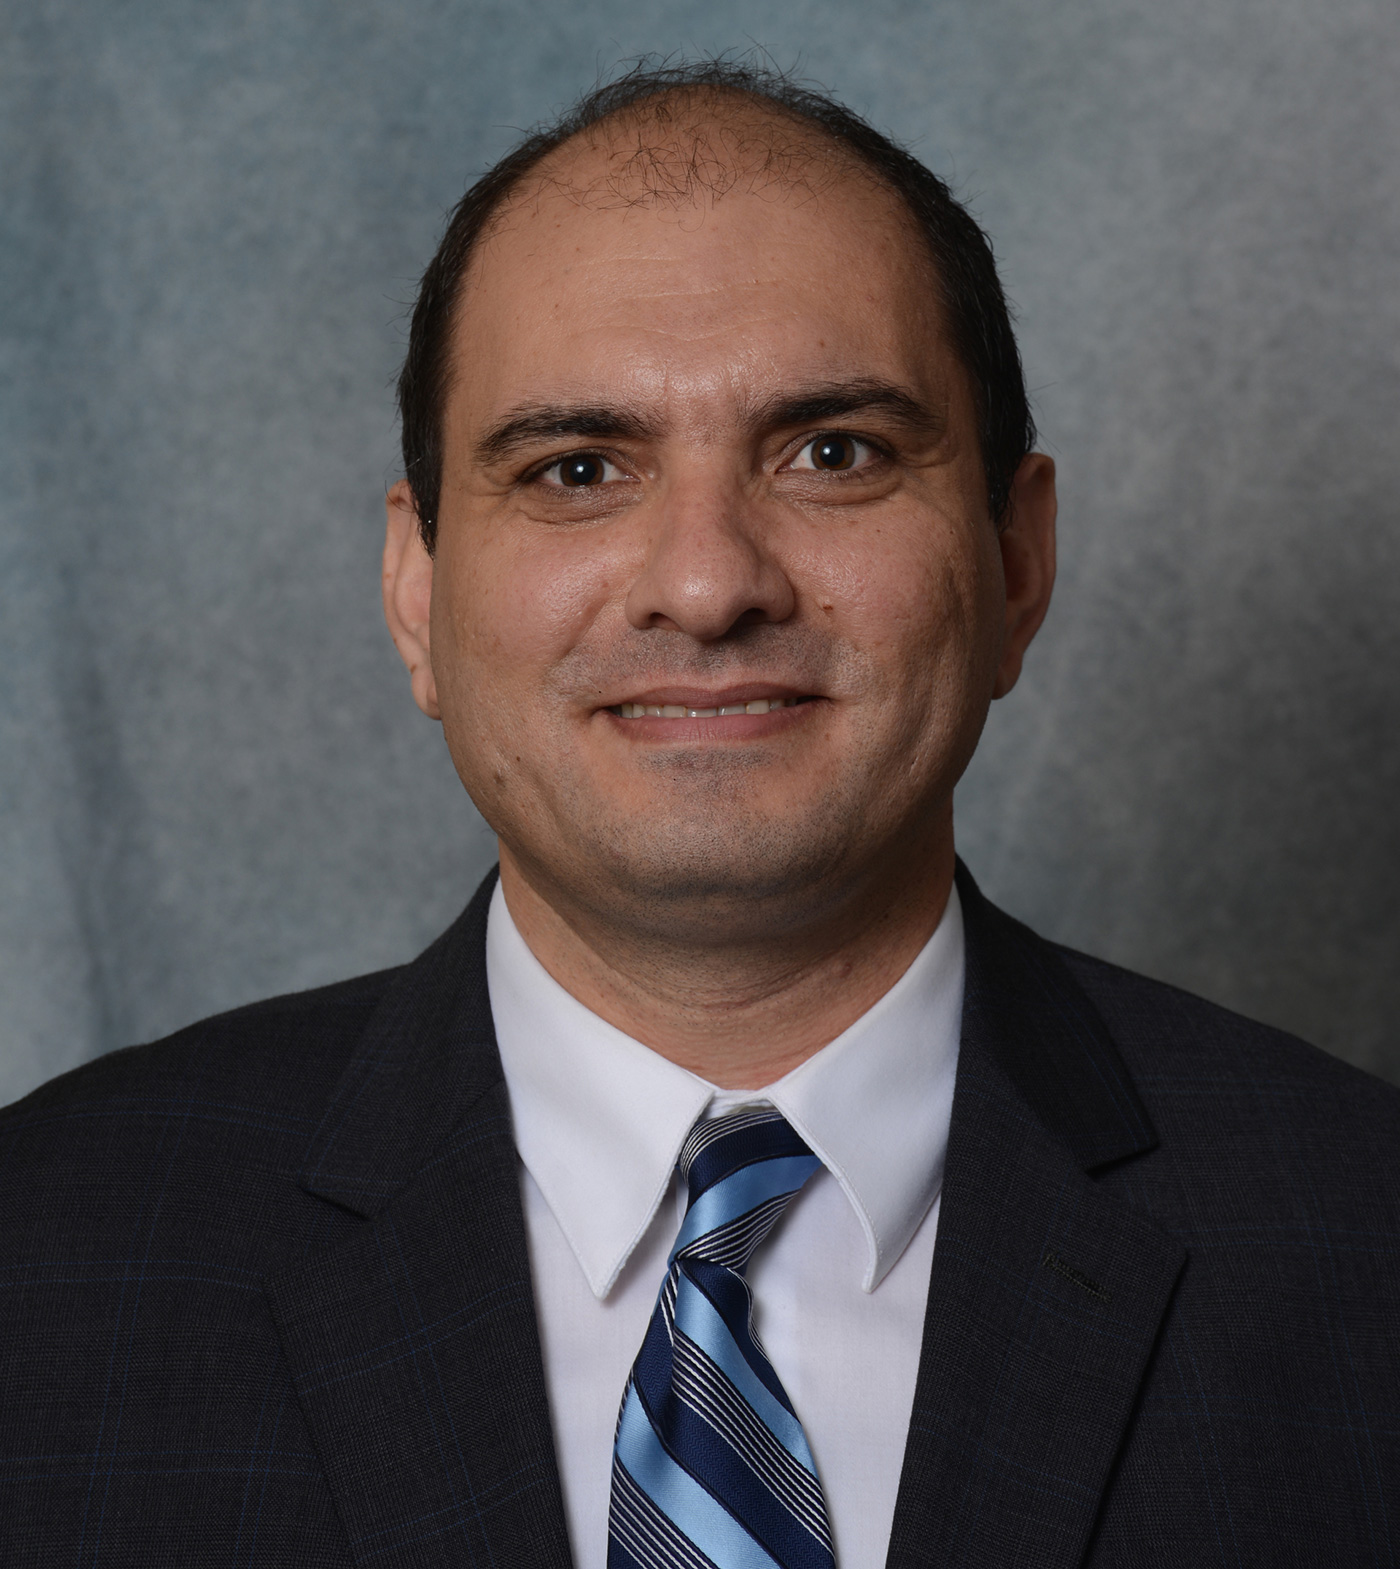 Murat Inalpolat, Ph.D. is an Assistant Professor in the Department of Mechanical Engineering at the University of Massachusetts Lowell. 